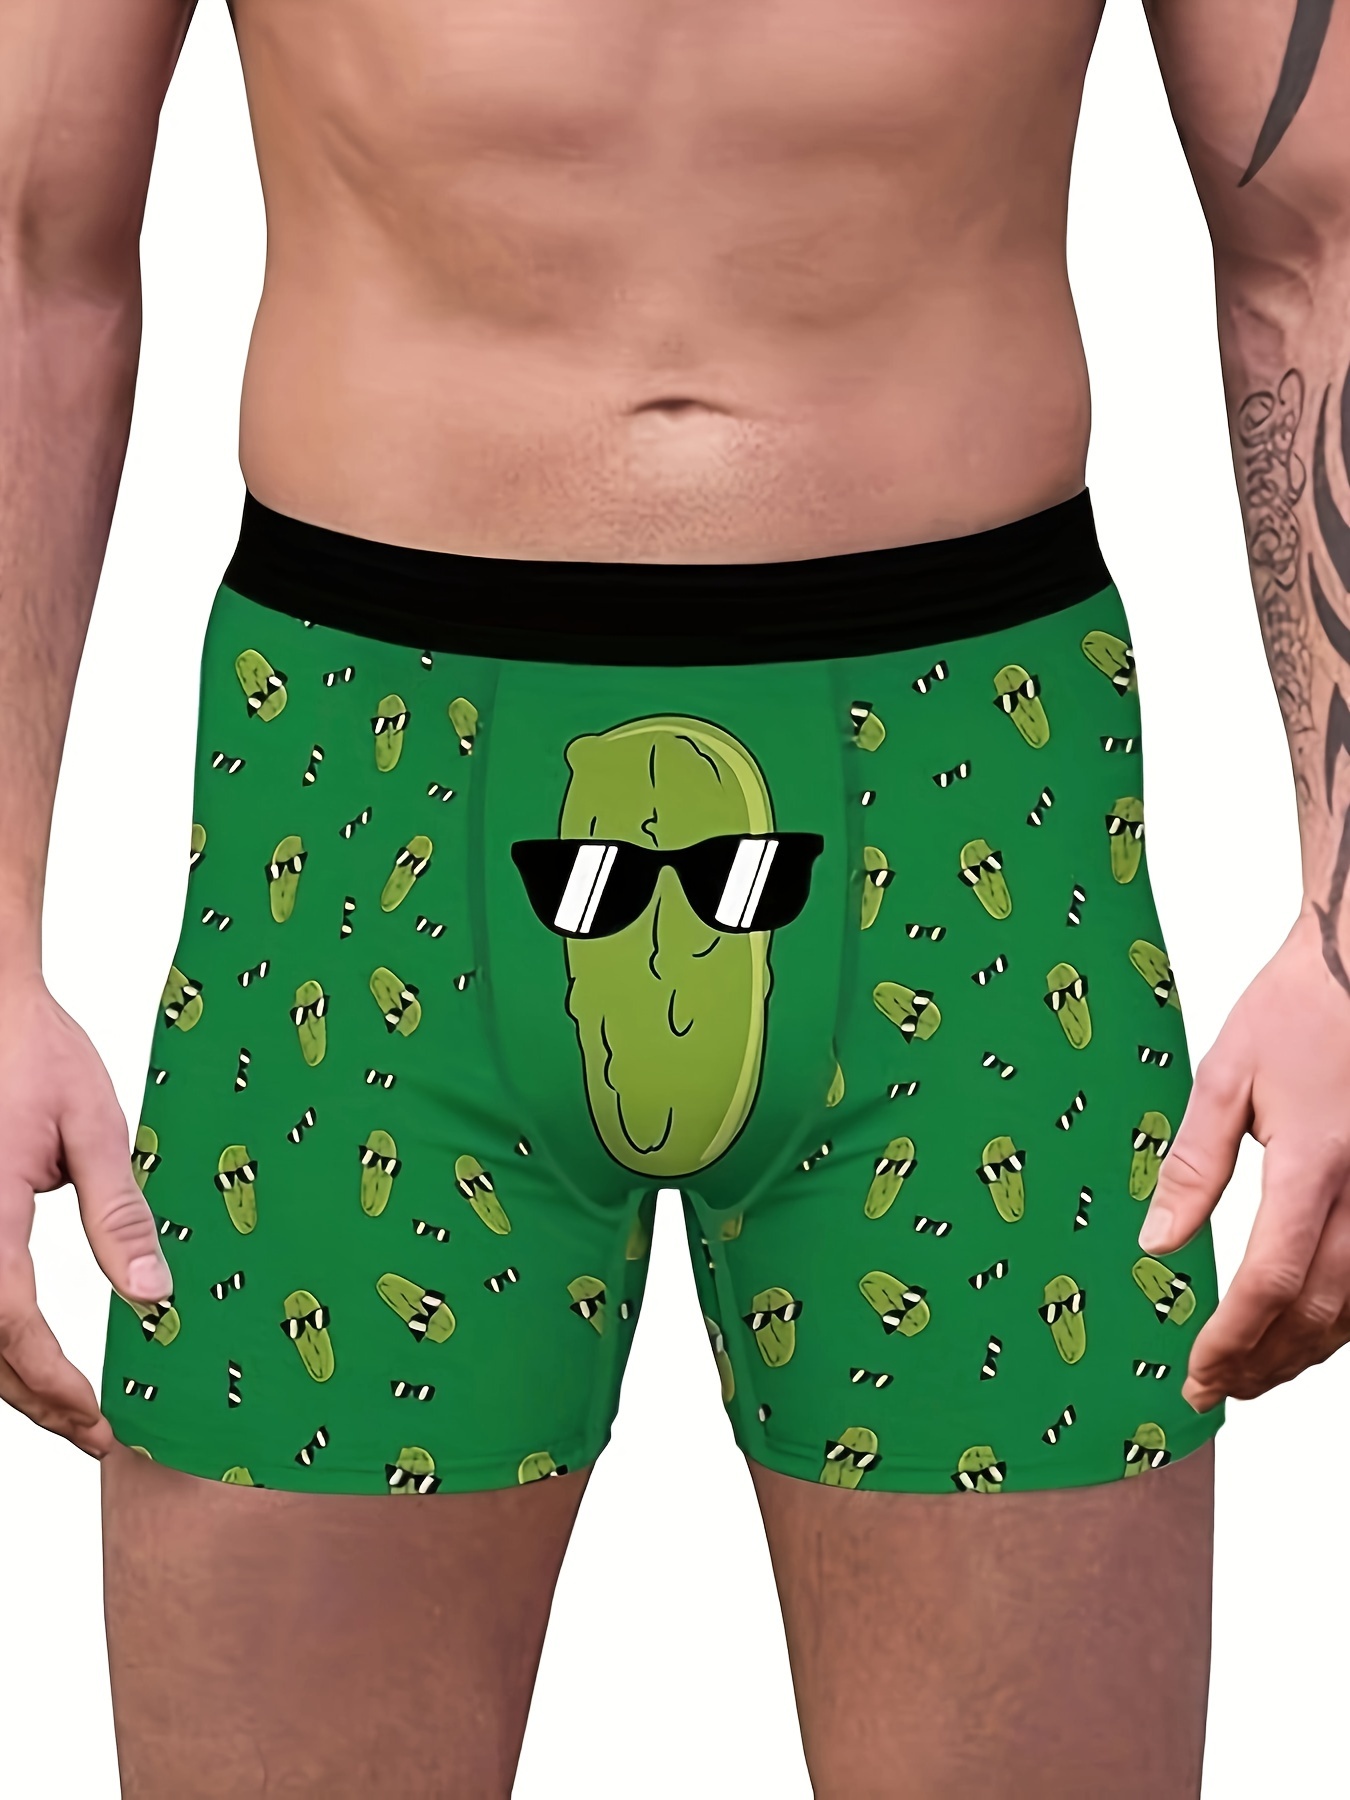 Rick and Morty Pickle Rick Happy Boxer Briefs Underwear Green